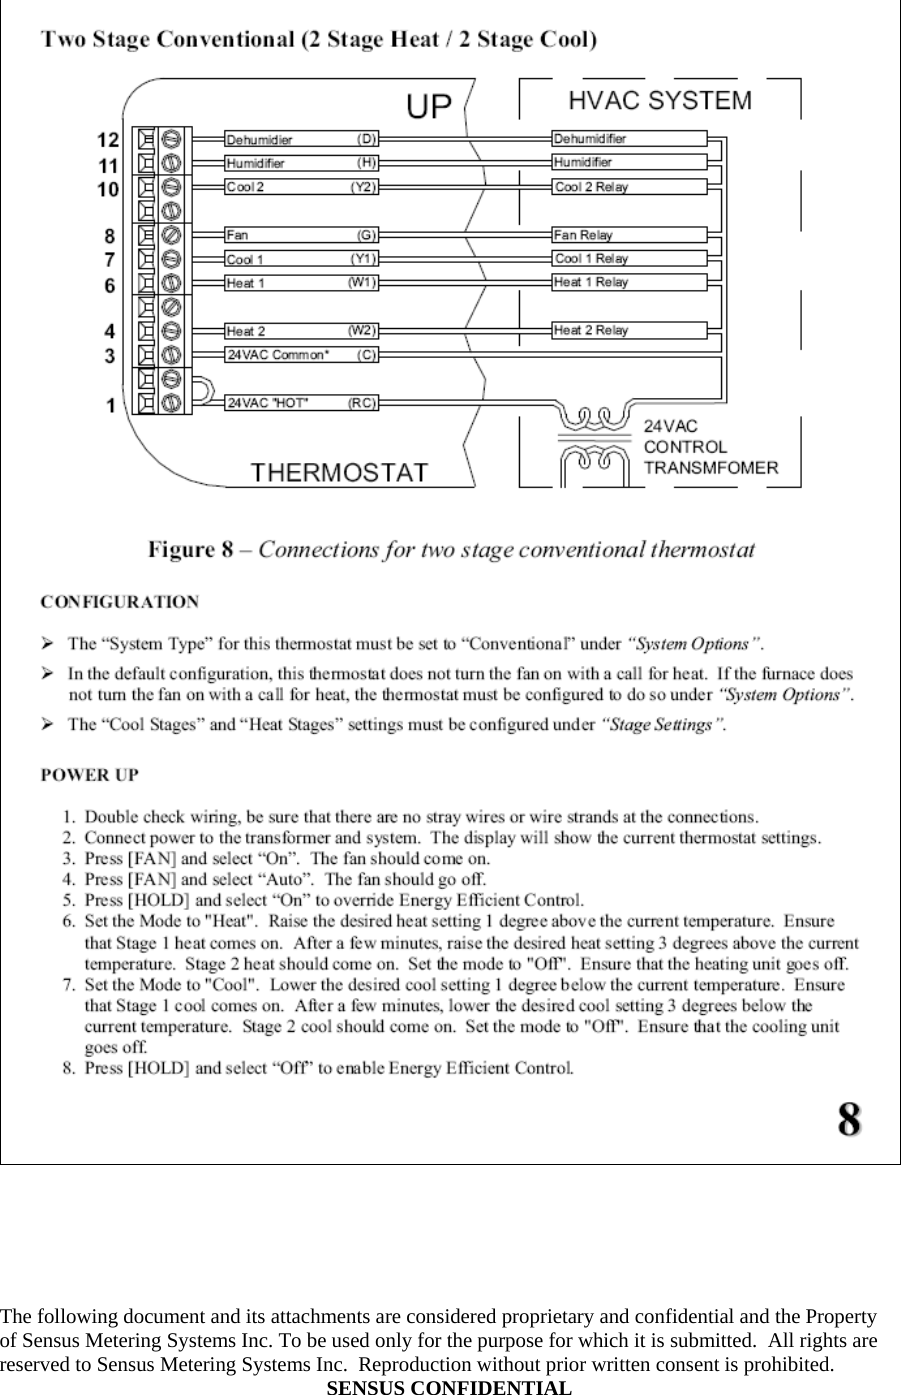  The following document and its attachments are considered proprietary and confidential and the Property of Sensus Metering Systems Inc. To be used only for the purpose for which it is submitted.  All rights are reserved to Sensus Metering Systems Inc.  Reproduction without prior written consent is prohibited. SENSUS CONFIDENTIAL    